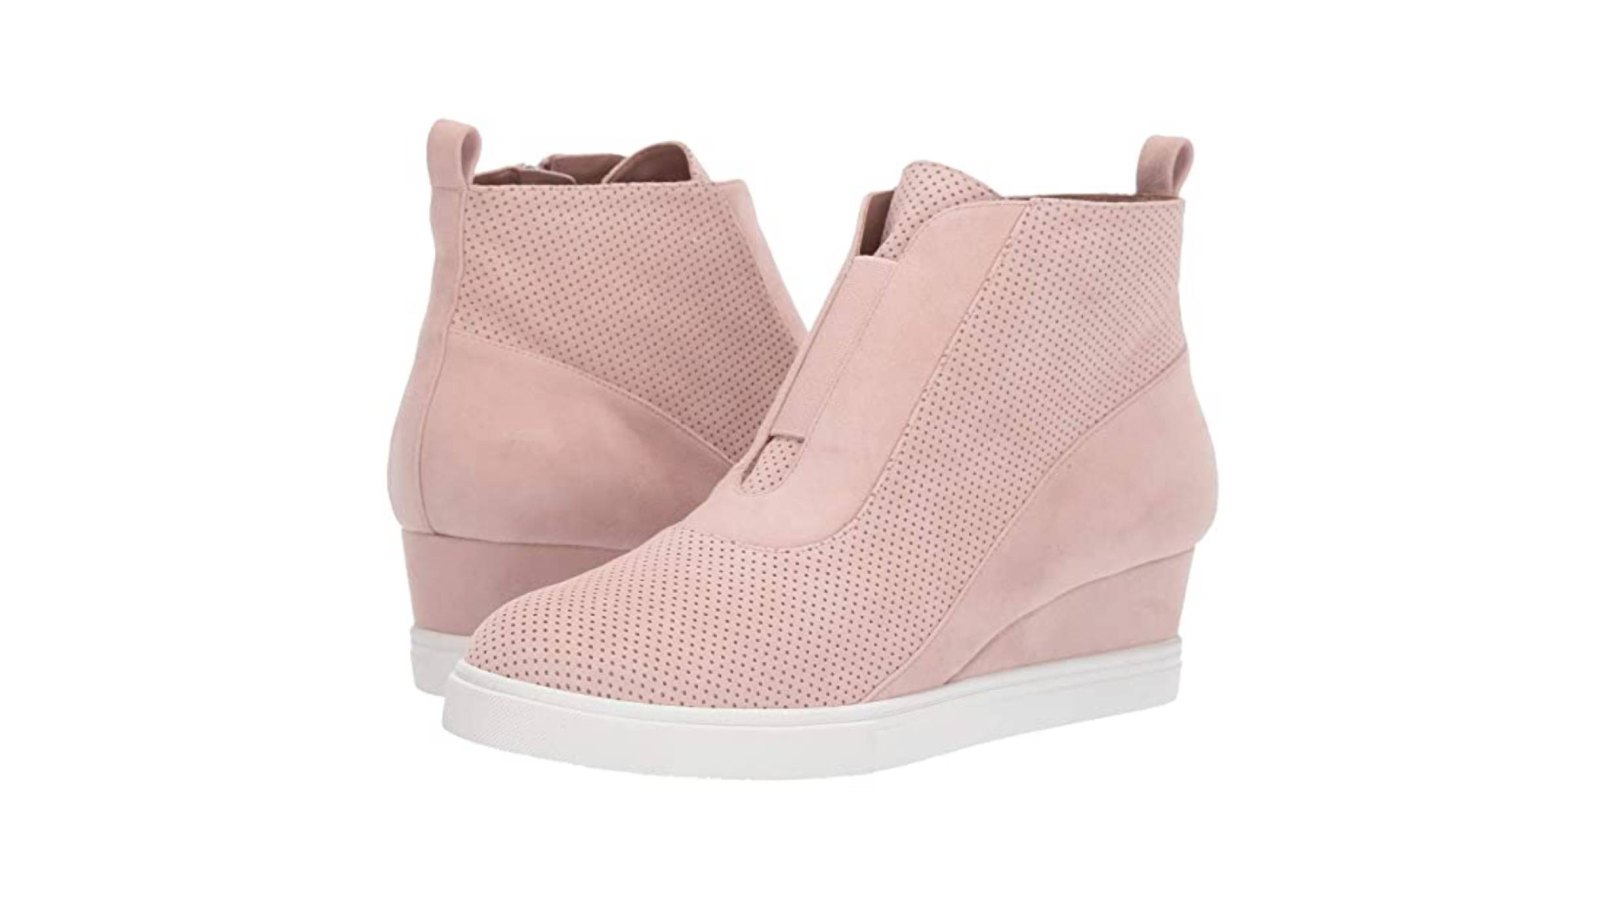 LINEA Paolo Anna Wedge Sneaker (Blush Perf Suede)